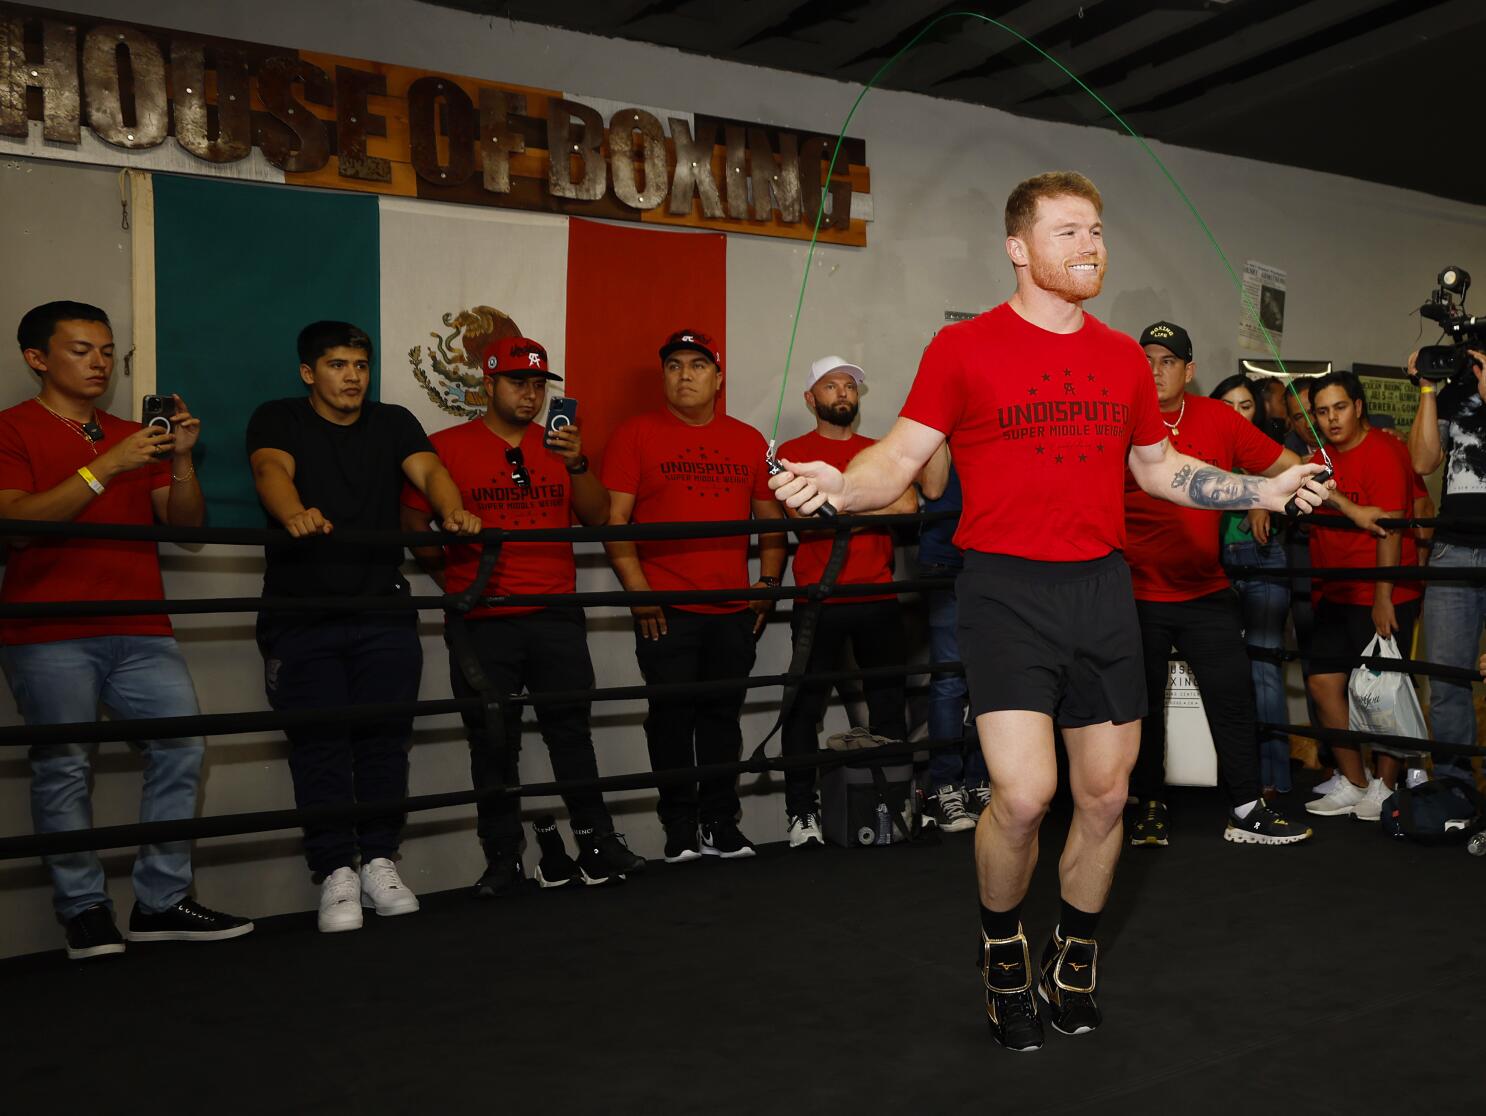 24/7 Canelo/Golovkin Debuts Saturday, August 26 on HBO - Brick